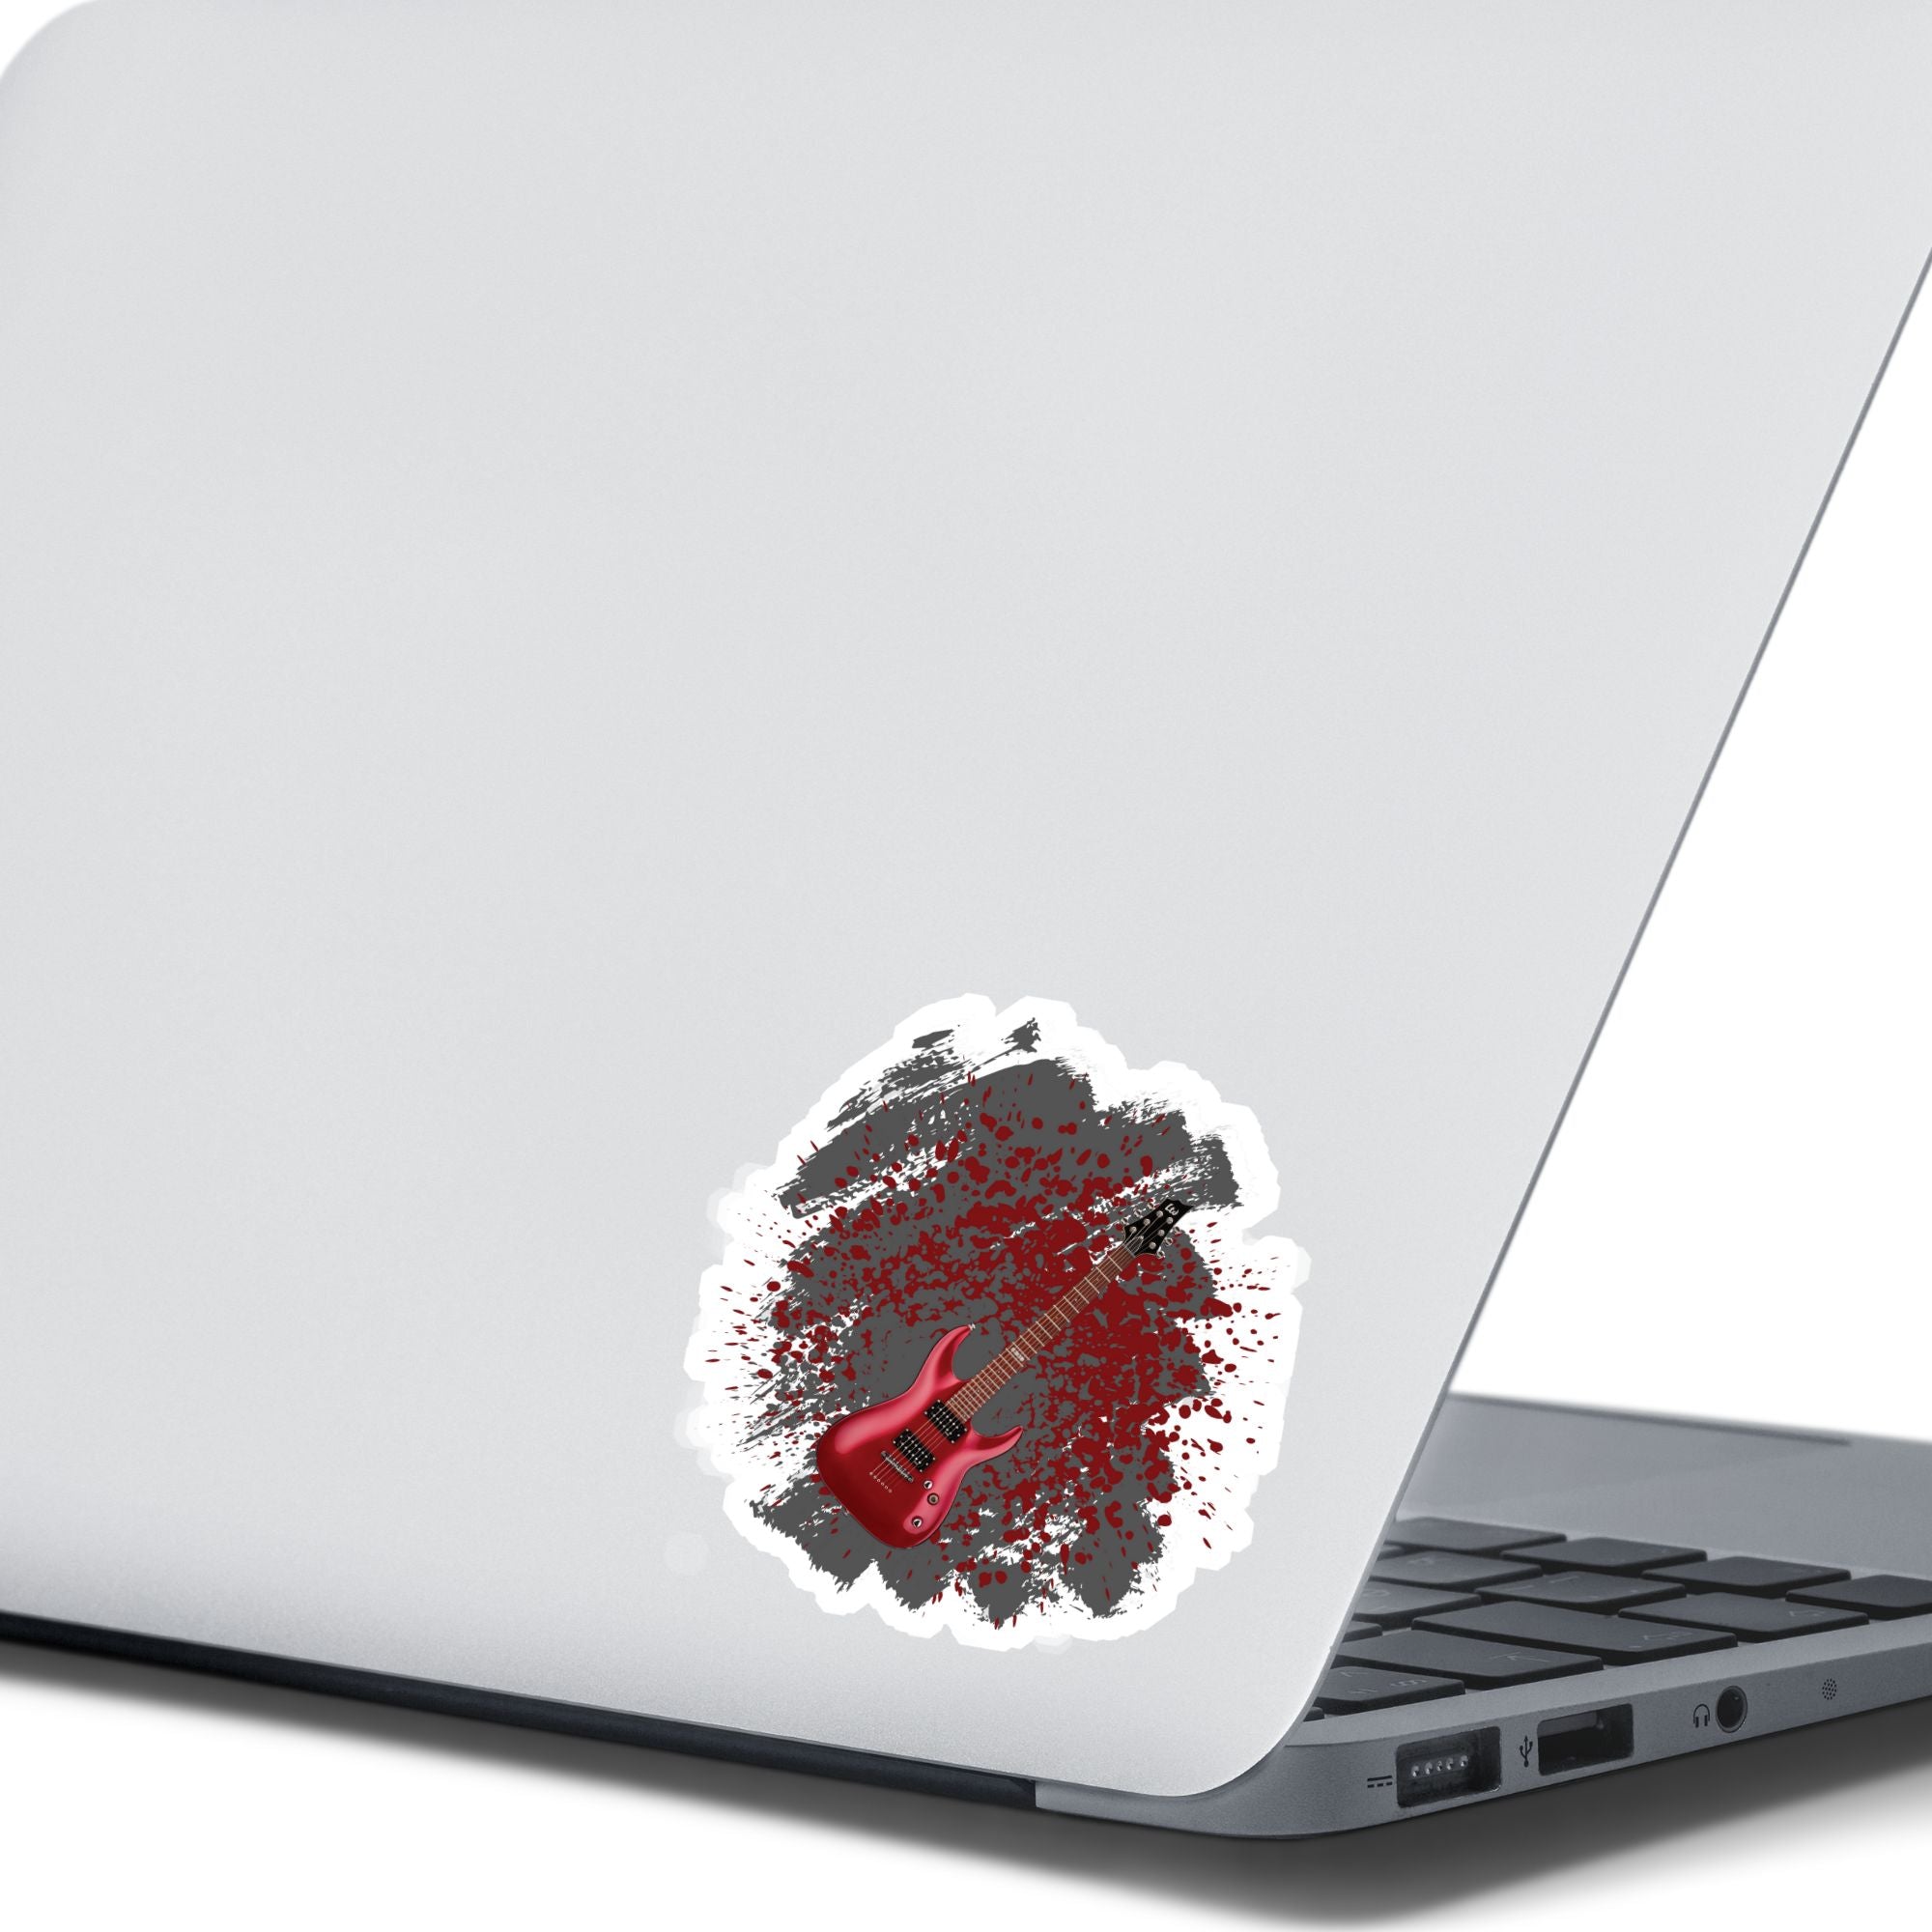 This guitar sticker is great for any guitarist, whether a beginner or a seasoned shredder! This individual die-cut sticker features a burgundy electric guitar on a gray and burgundy paint splattered background. Turn it up!  This image shows the guitar sticker on the back of an open laptop.